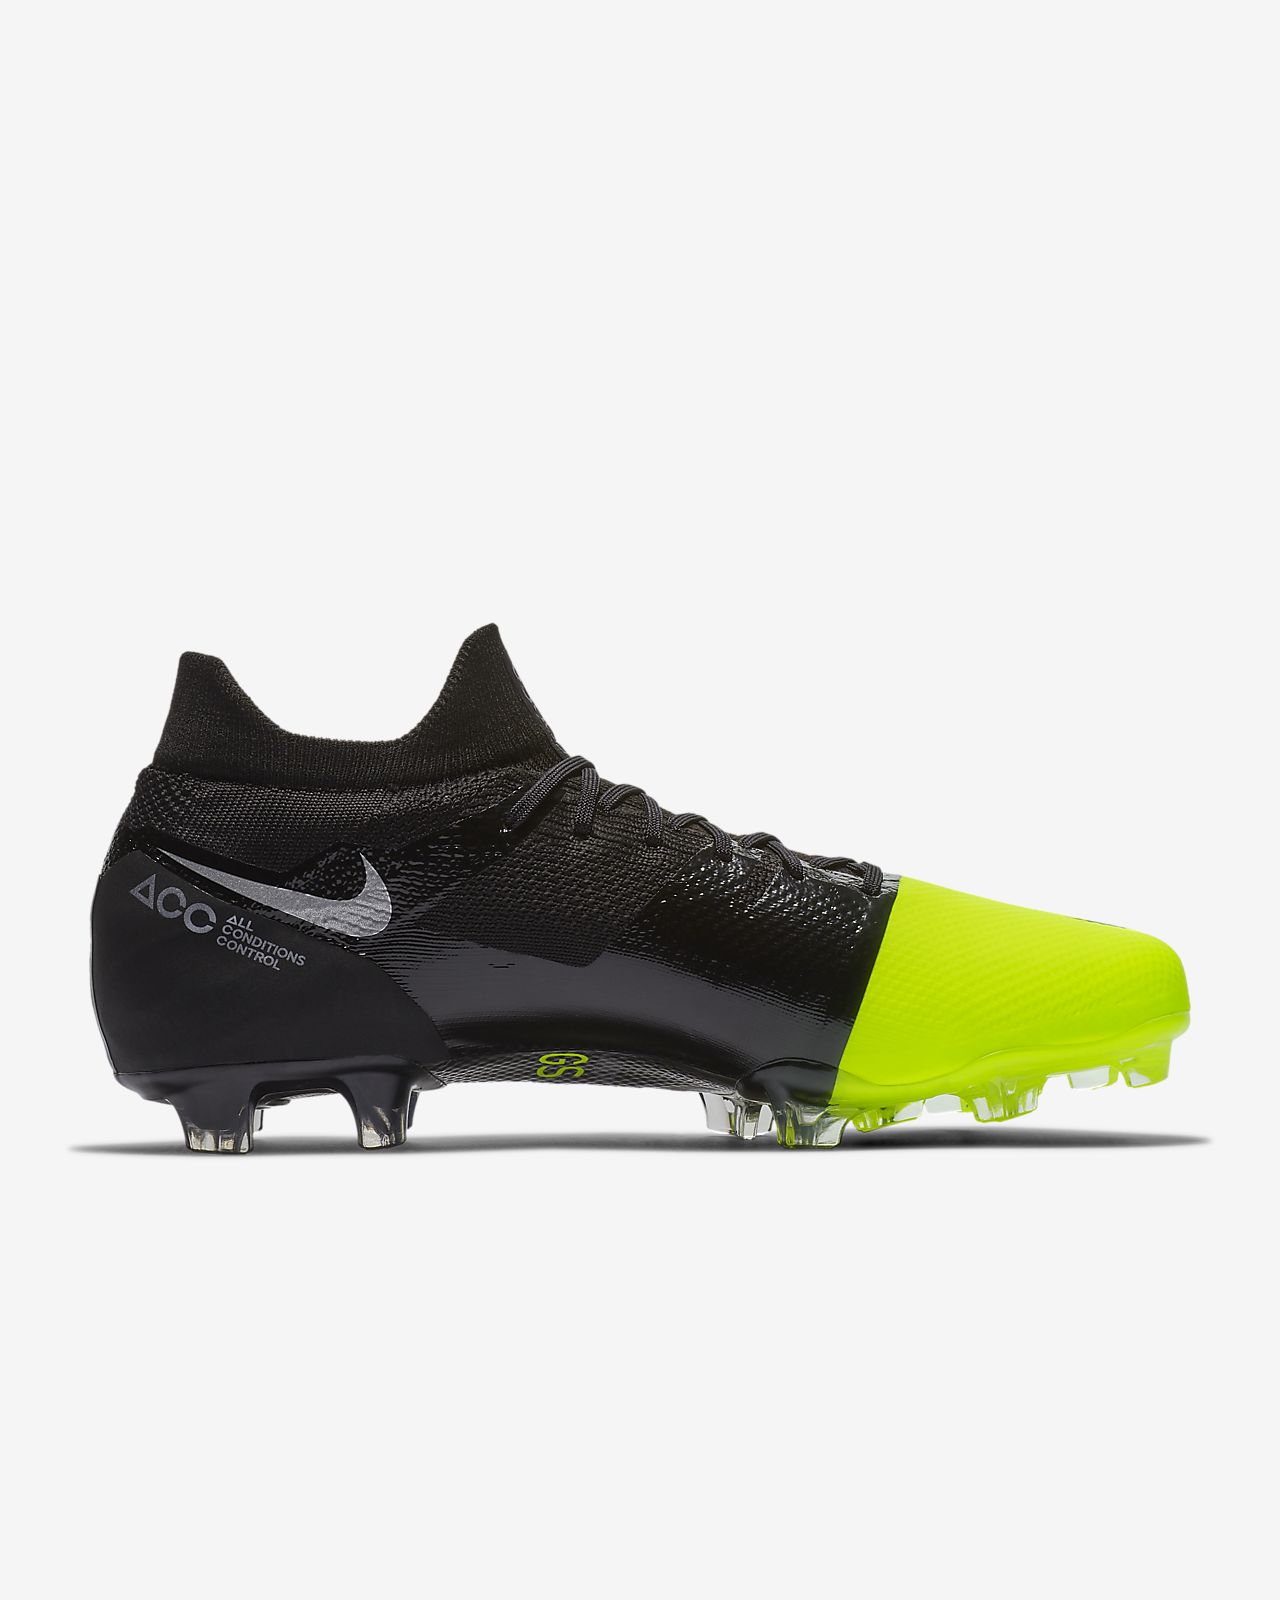 Nike Mercurial Vapor Superfly 1 Video Review Soccer